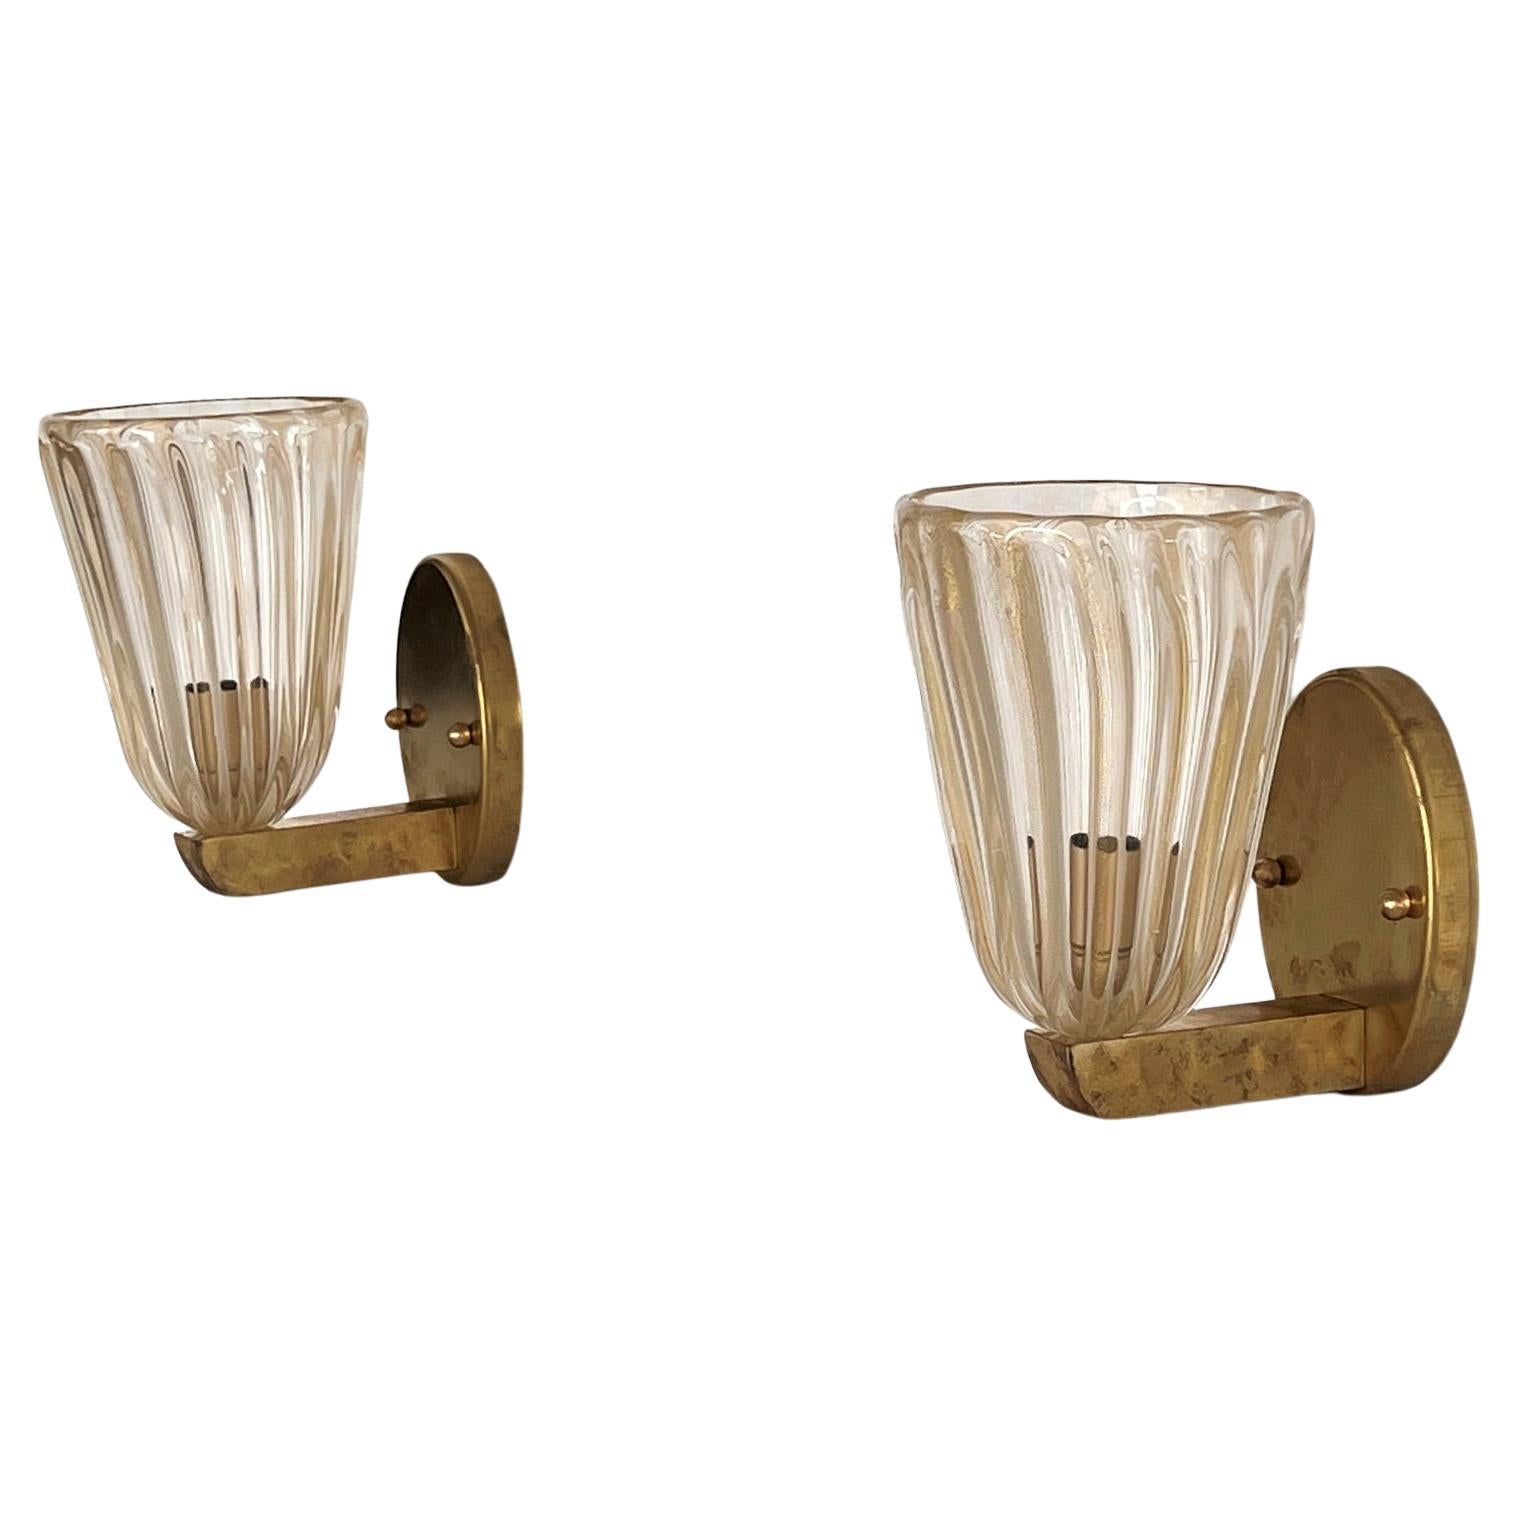 Beautiful set of two gorgeous brass wall lamps made of strong brass base and transparent Murano glasses with golden shimmer/glitter inside the glass. Art Deco style.
The beautiful hand-crafted glasses have a slight wave shape, please look carefully